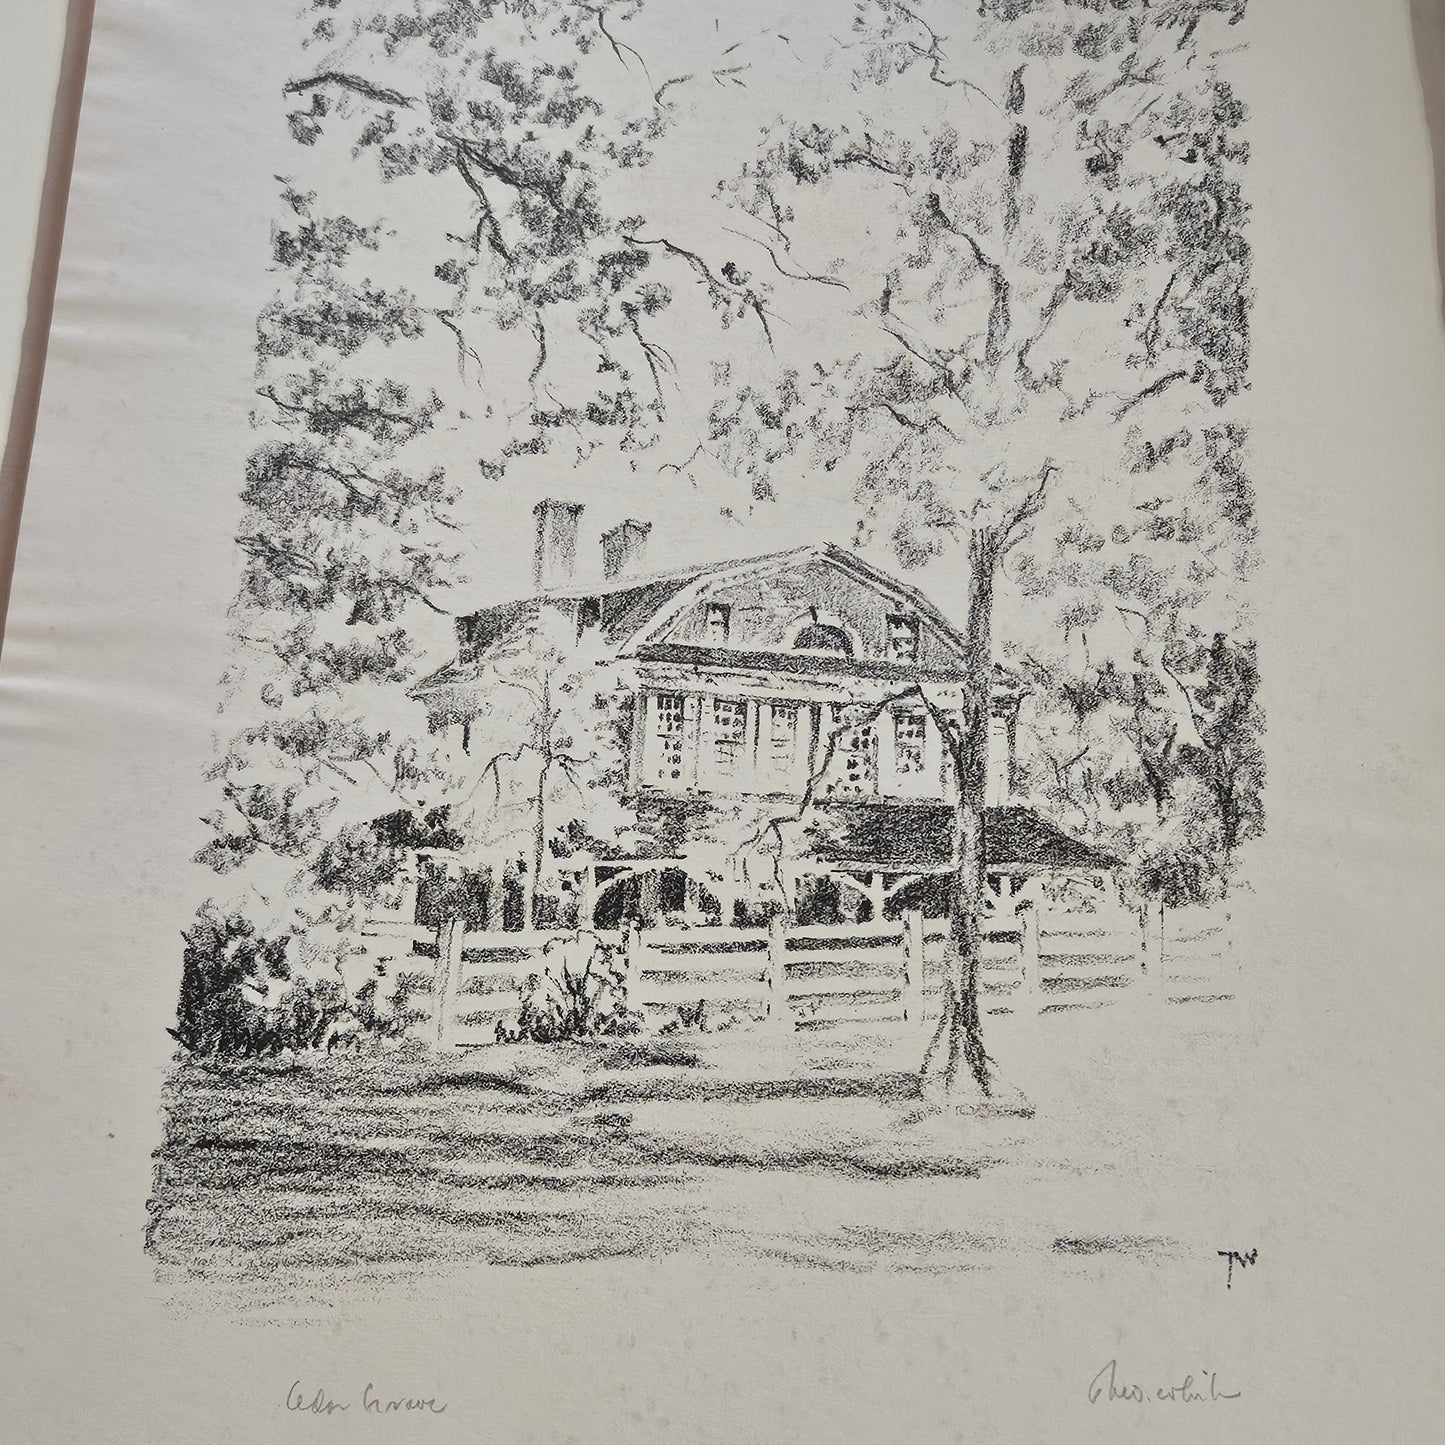 Book: A Portfolio of Seven Lithographs of The Colonial Mansions in Fairmount Park by Theodore B. White